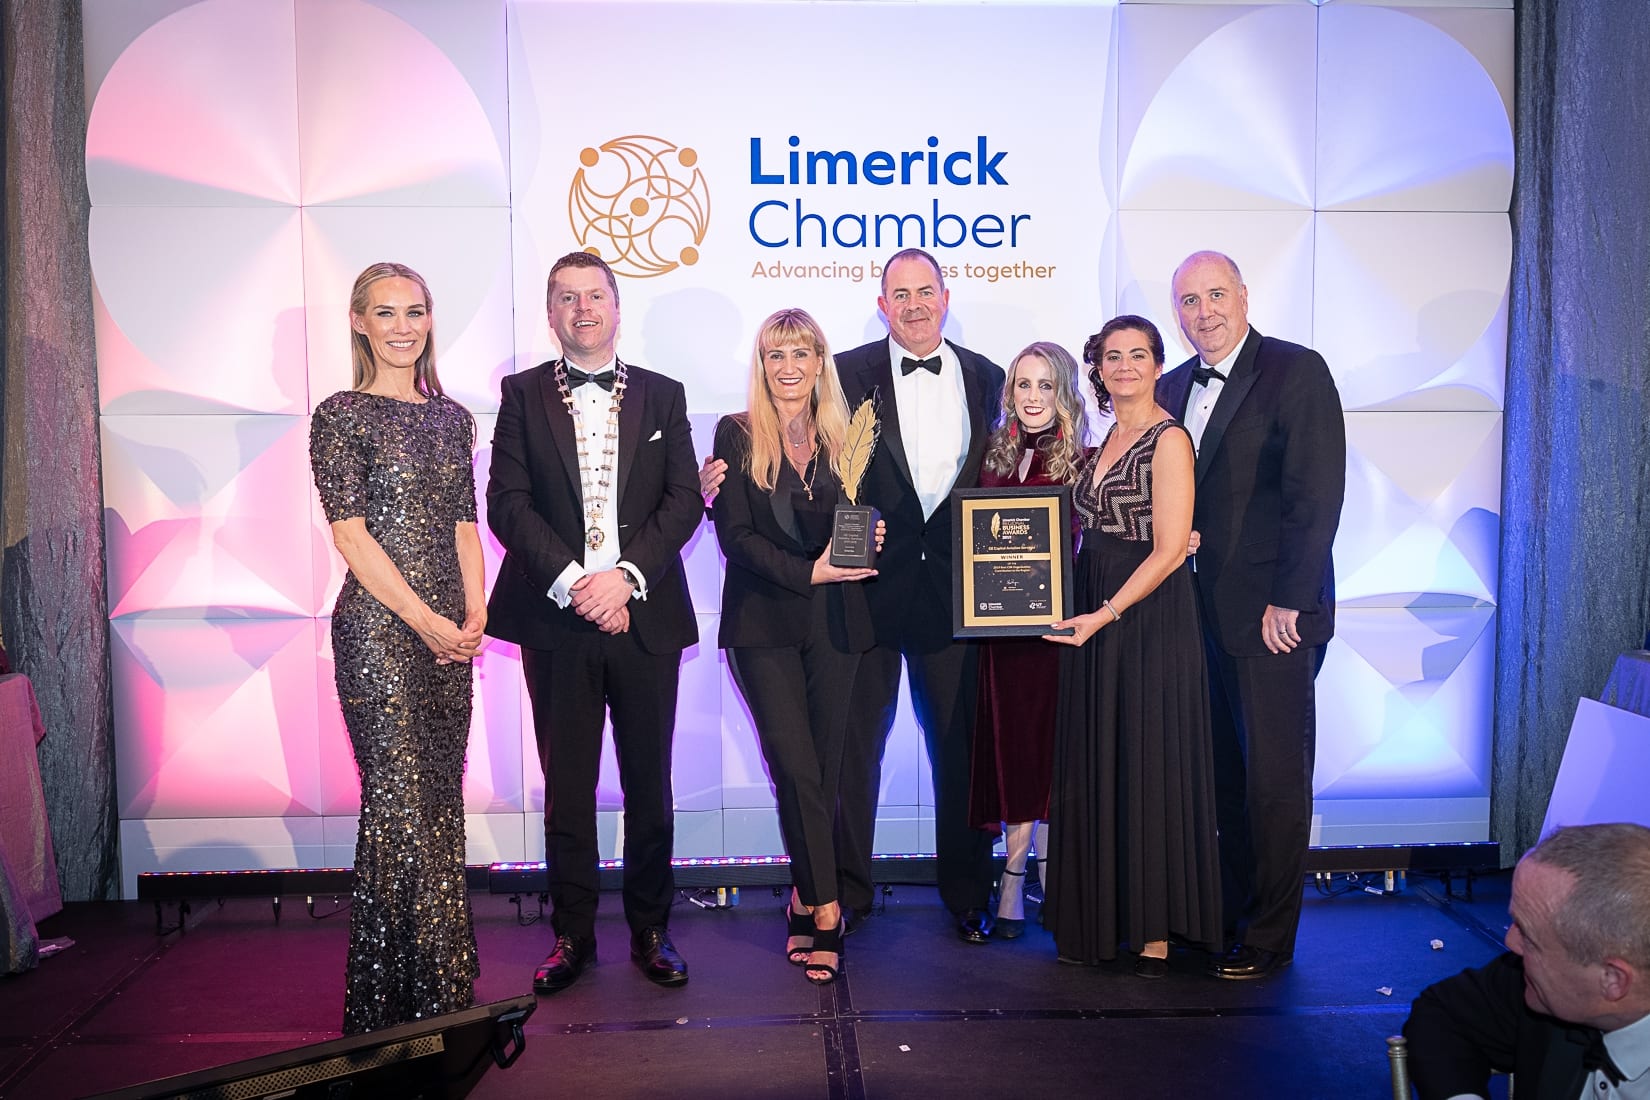 No repro fee-Limerick Chamber President’s Dinner
and Limerick Chamber Regional Business Awards 2019 which was held in the Strand Hotel on Friday 15th November /Best CRS/  - From Left to Right:  Dee Ryan - CEO Limerick Chamber, Eoin Ryan - President Limerick Chamber, Brenda Hickey - Winner / GE Capital Aviation Services, John Ludden - Winner / GE Capital Aviation Services, Selene Alford- Winner / GE Capital Aviation Services, Valerie Keating- Winner / GE Capital Aviation Services, Cathal Treacy - Deloitte / Sponsor.  
Photo credit Shauna Kennedy